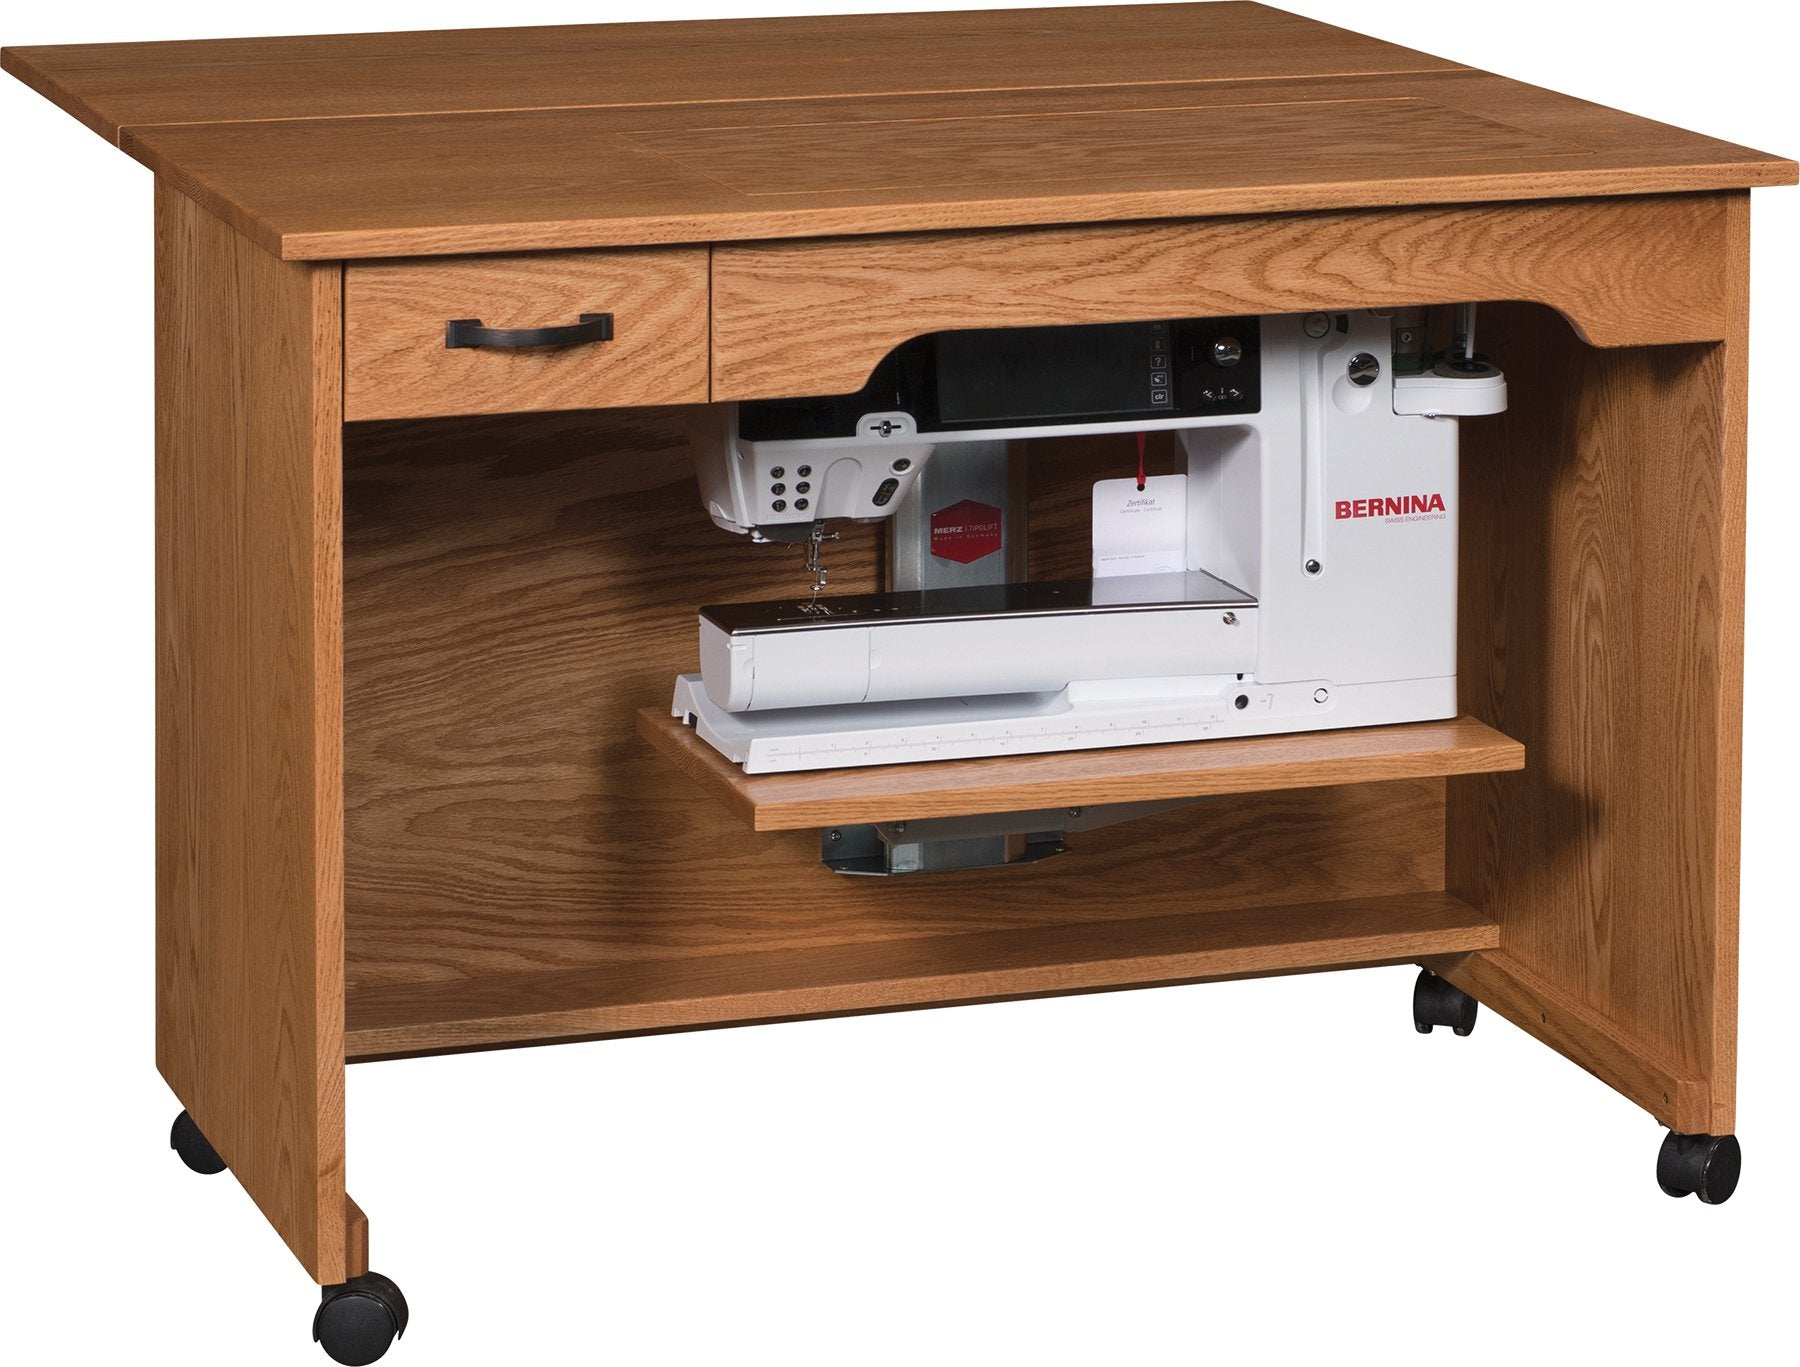 Timberside Woodworking 111-SD Sewing Desk – She Sewing Tables